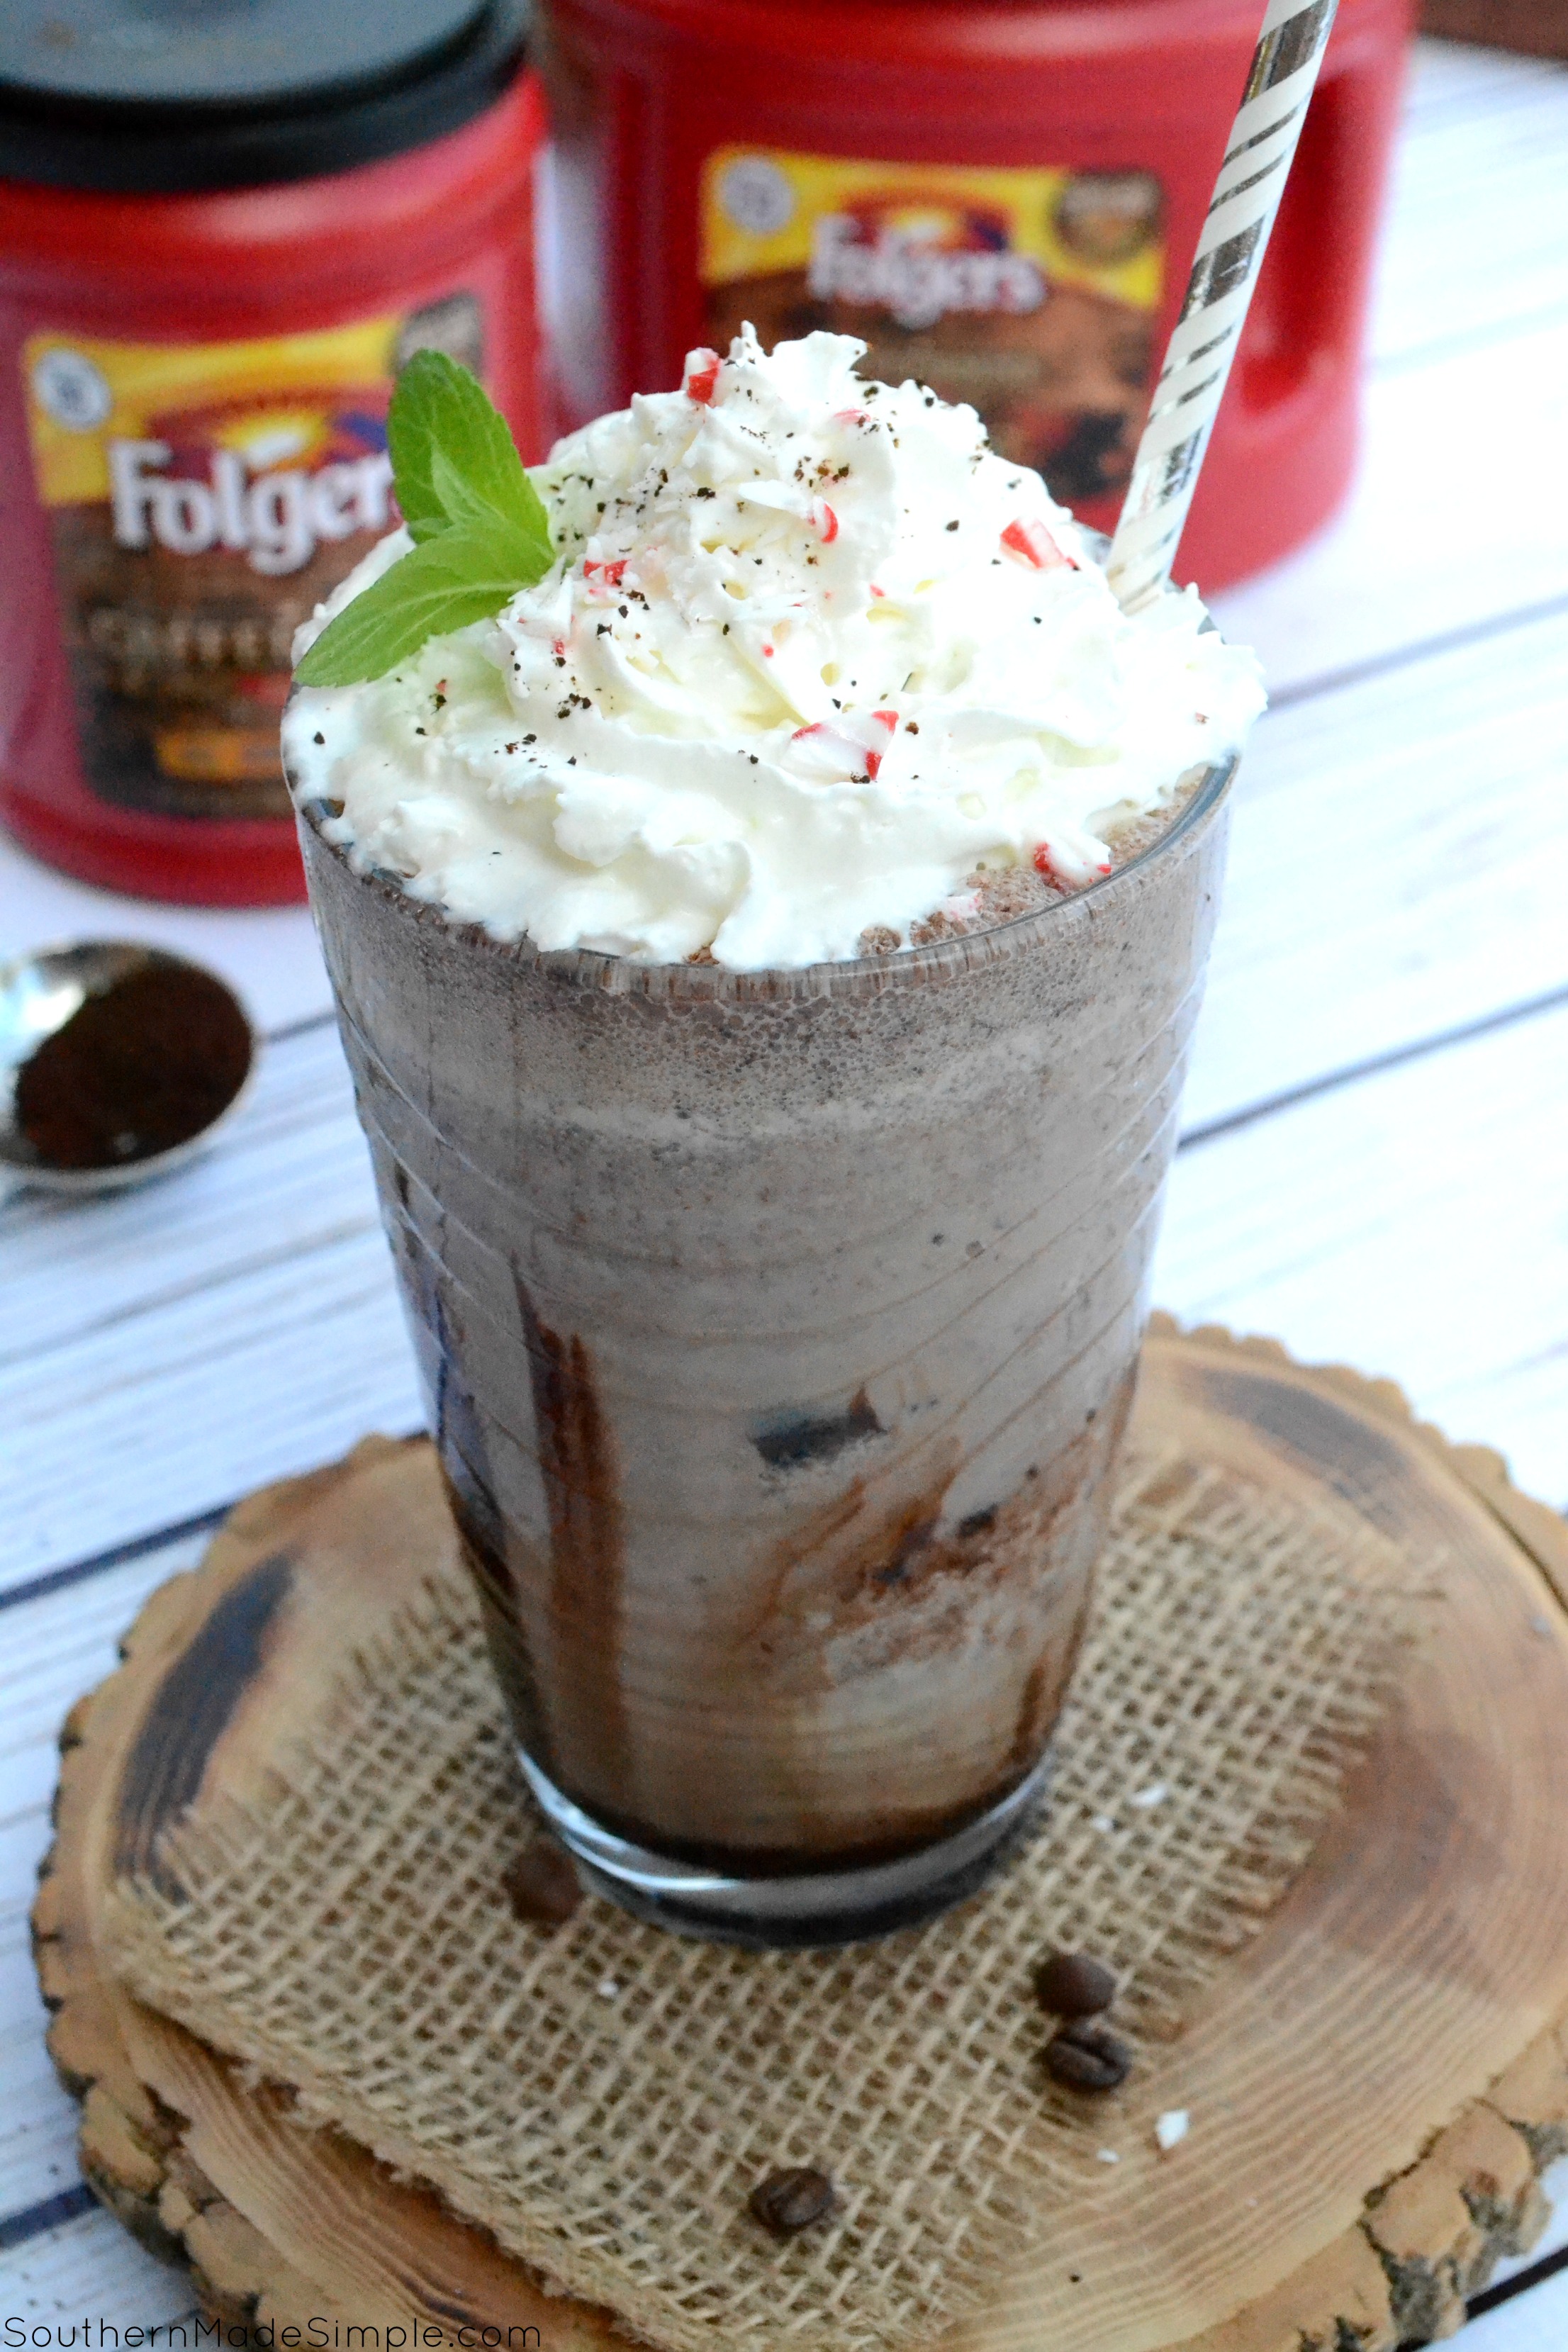 This Mocha Mint Frappe Shake combines perfectly brewed Folgers Coffeehouse Blend coffee with decadent chocolate and mint chip ice cream into an irresistible frappe shake that's beyond delicious and ready in less than 5 minutes! #CoffeeHouseBlend #ad 